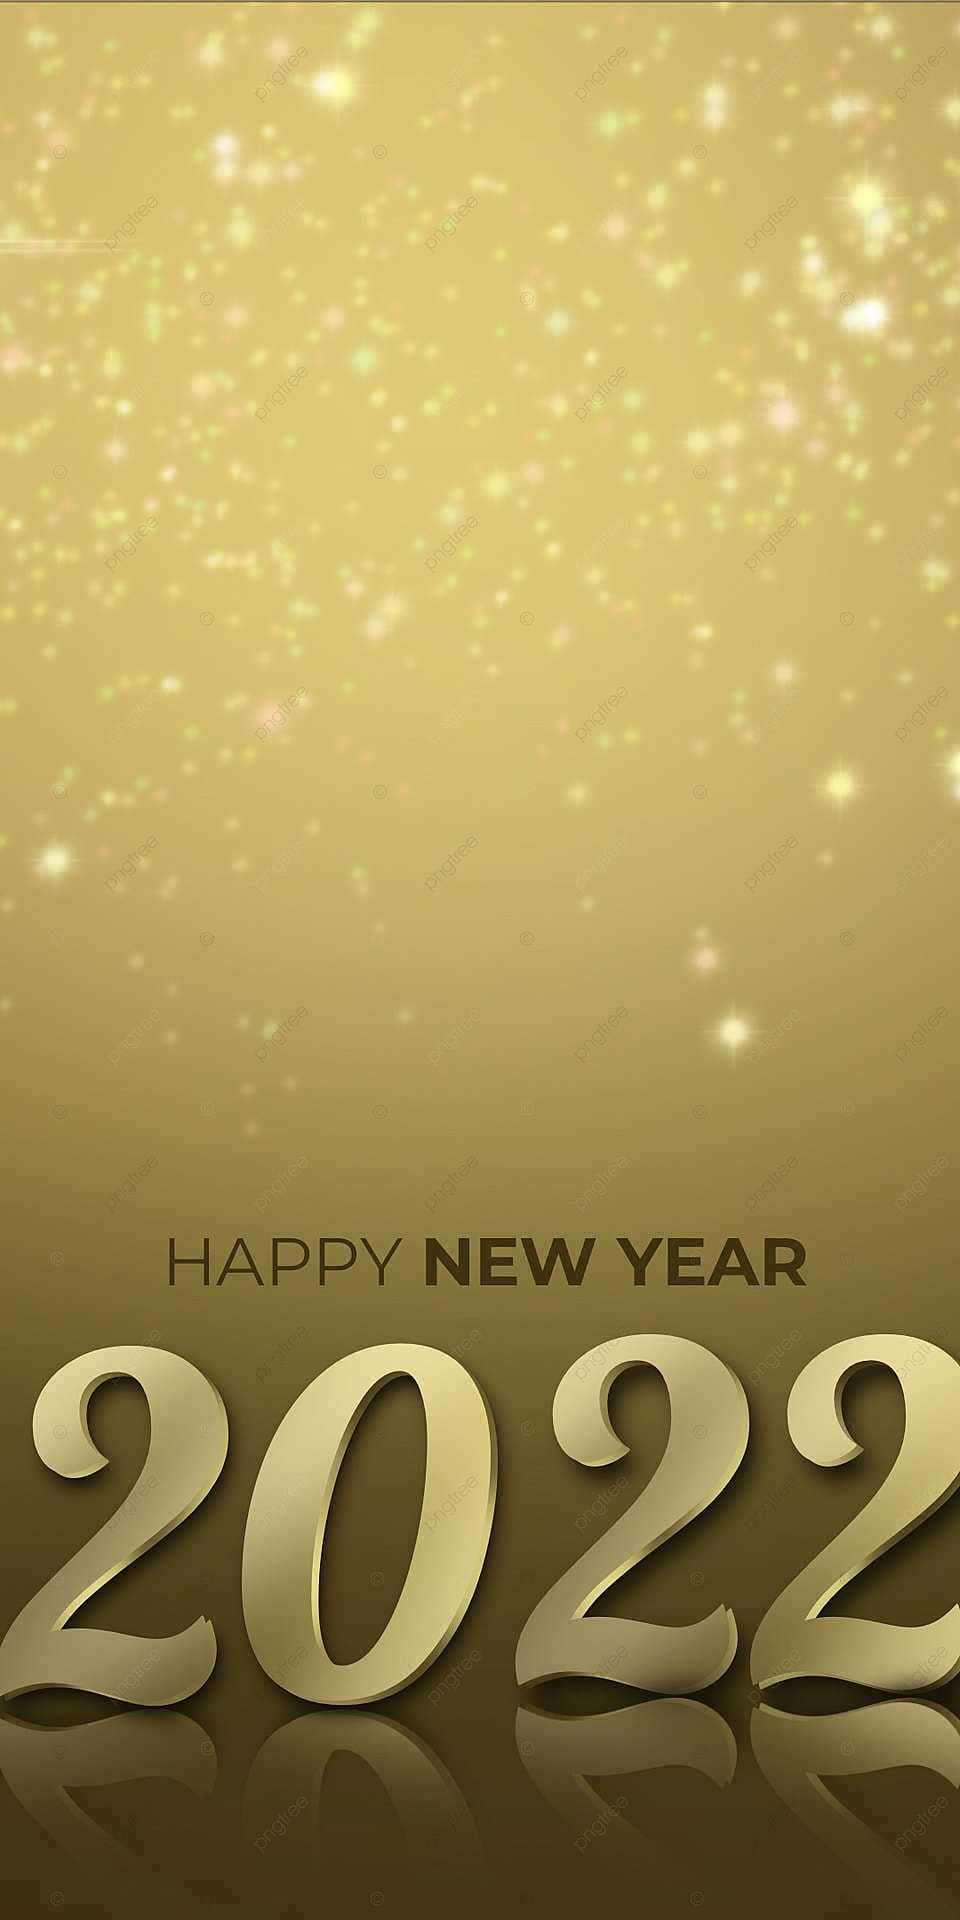 New Year 2022 Wallpaper Golden Shades Background, Wallpaper Happy New Year Happy Background Image for Free Download